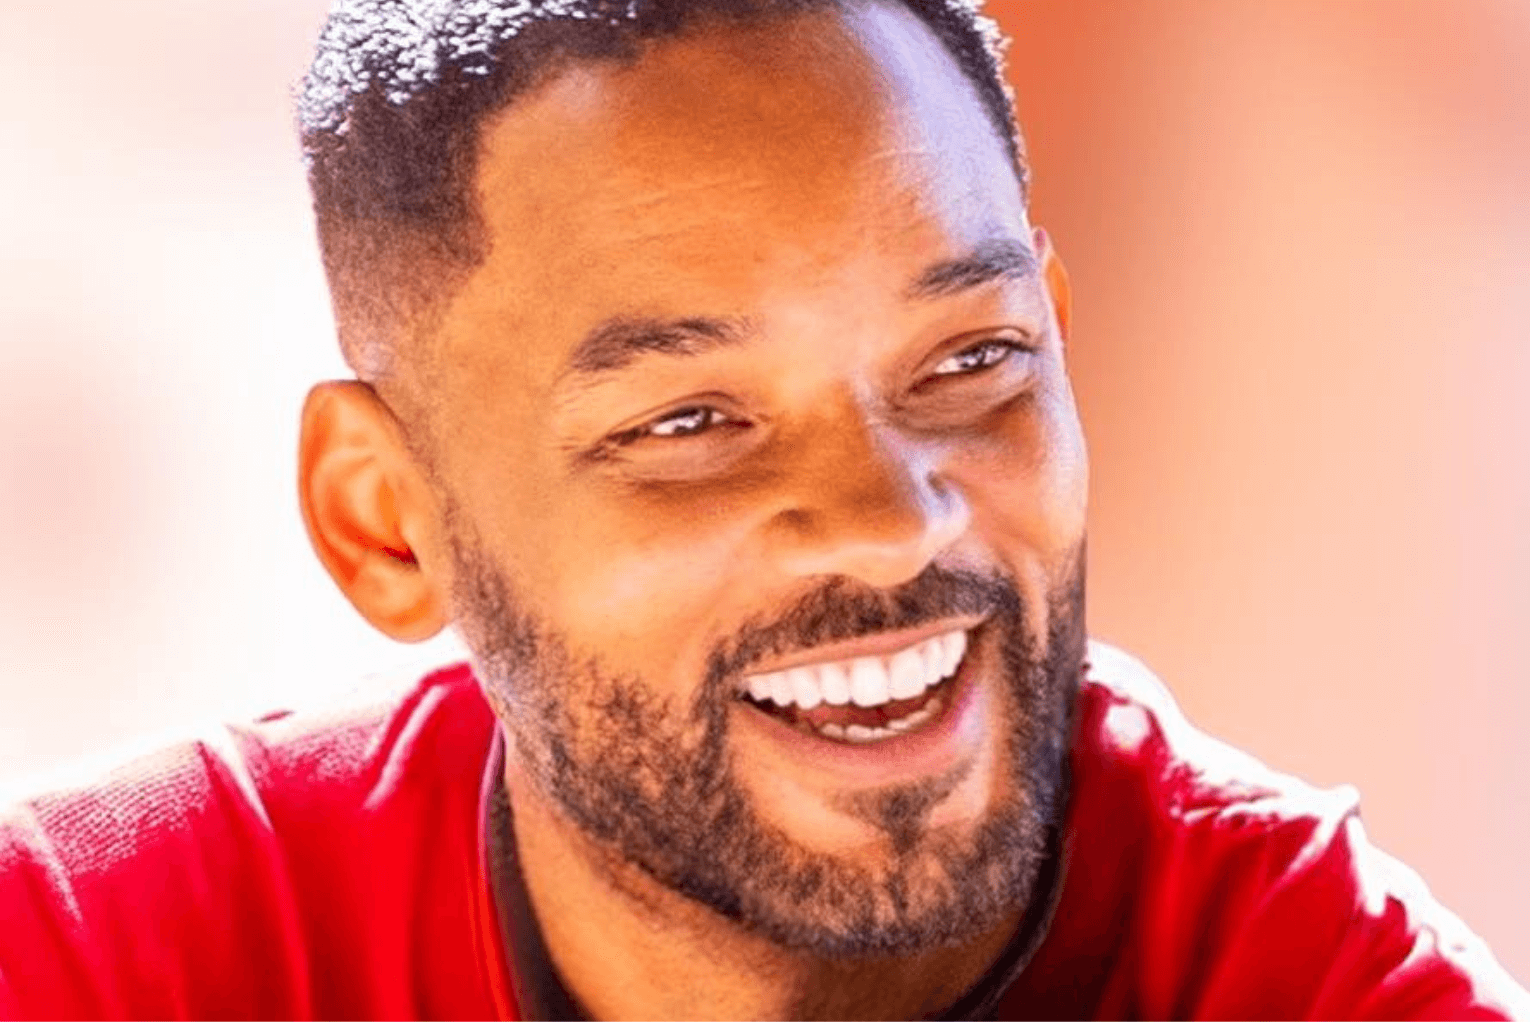 Is Will Smith Now a Christian?